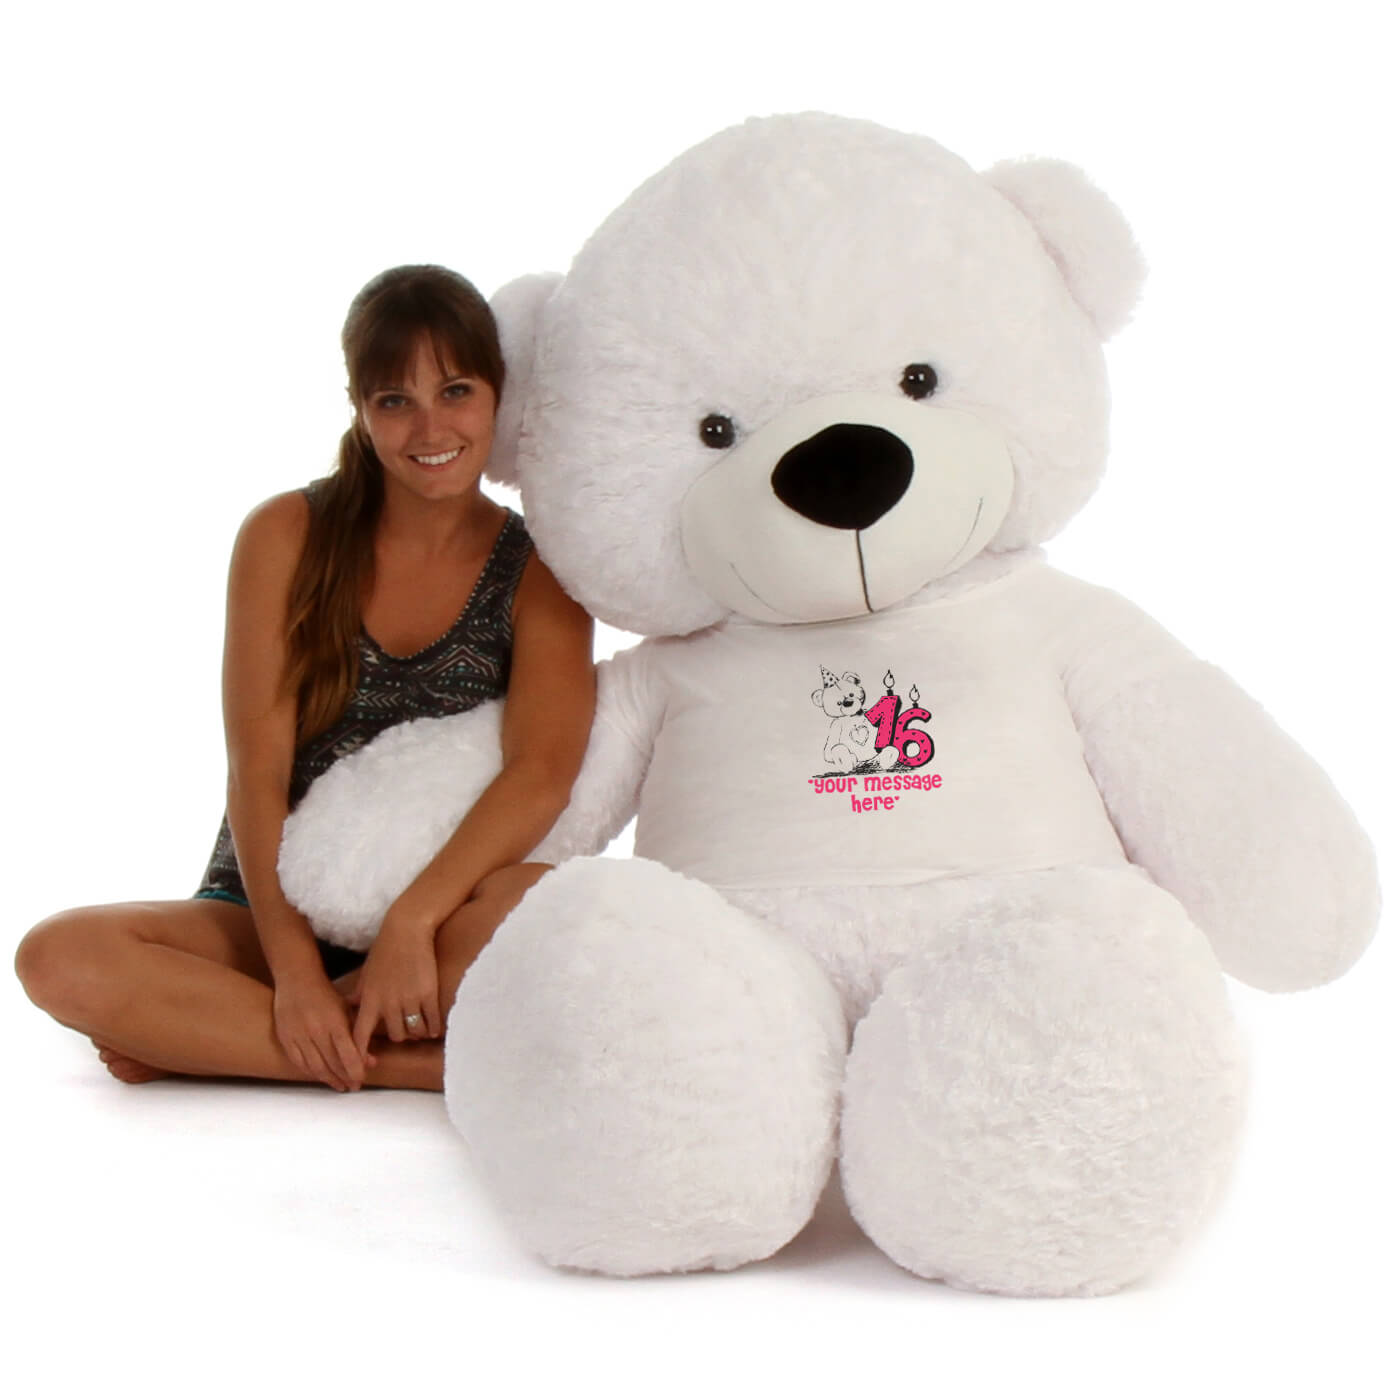 6ft-giant-teddy-coco-cuddles-white-bear-in-a-happy-birthday-your-message-here-t-shirt.jpg